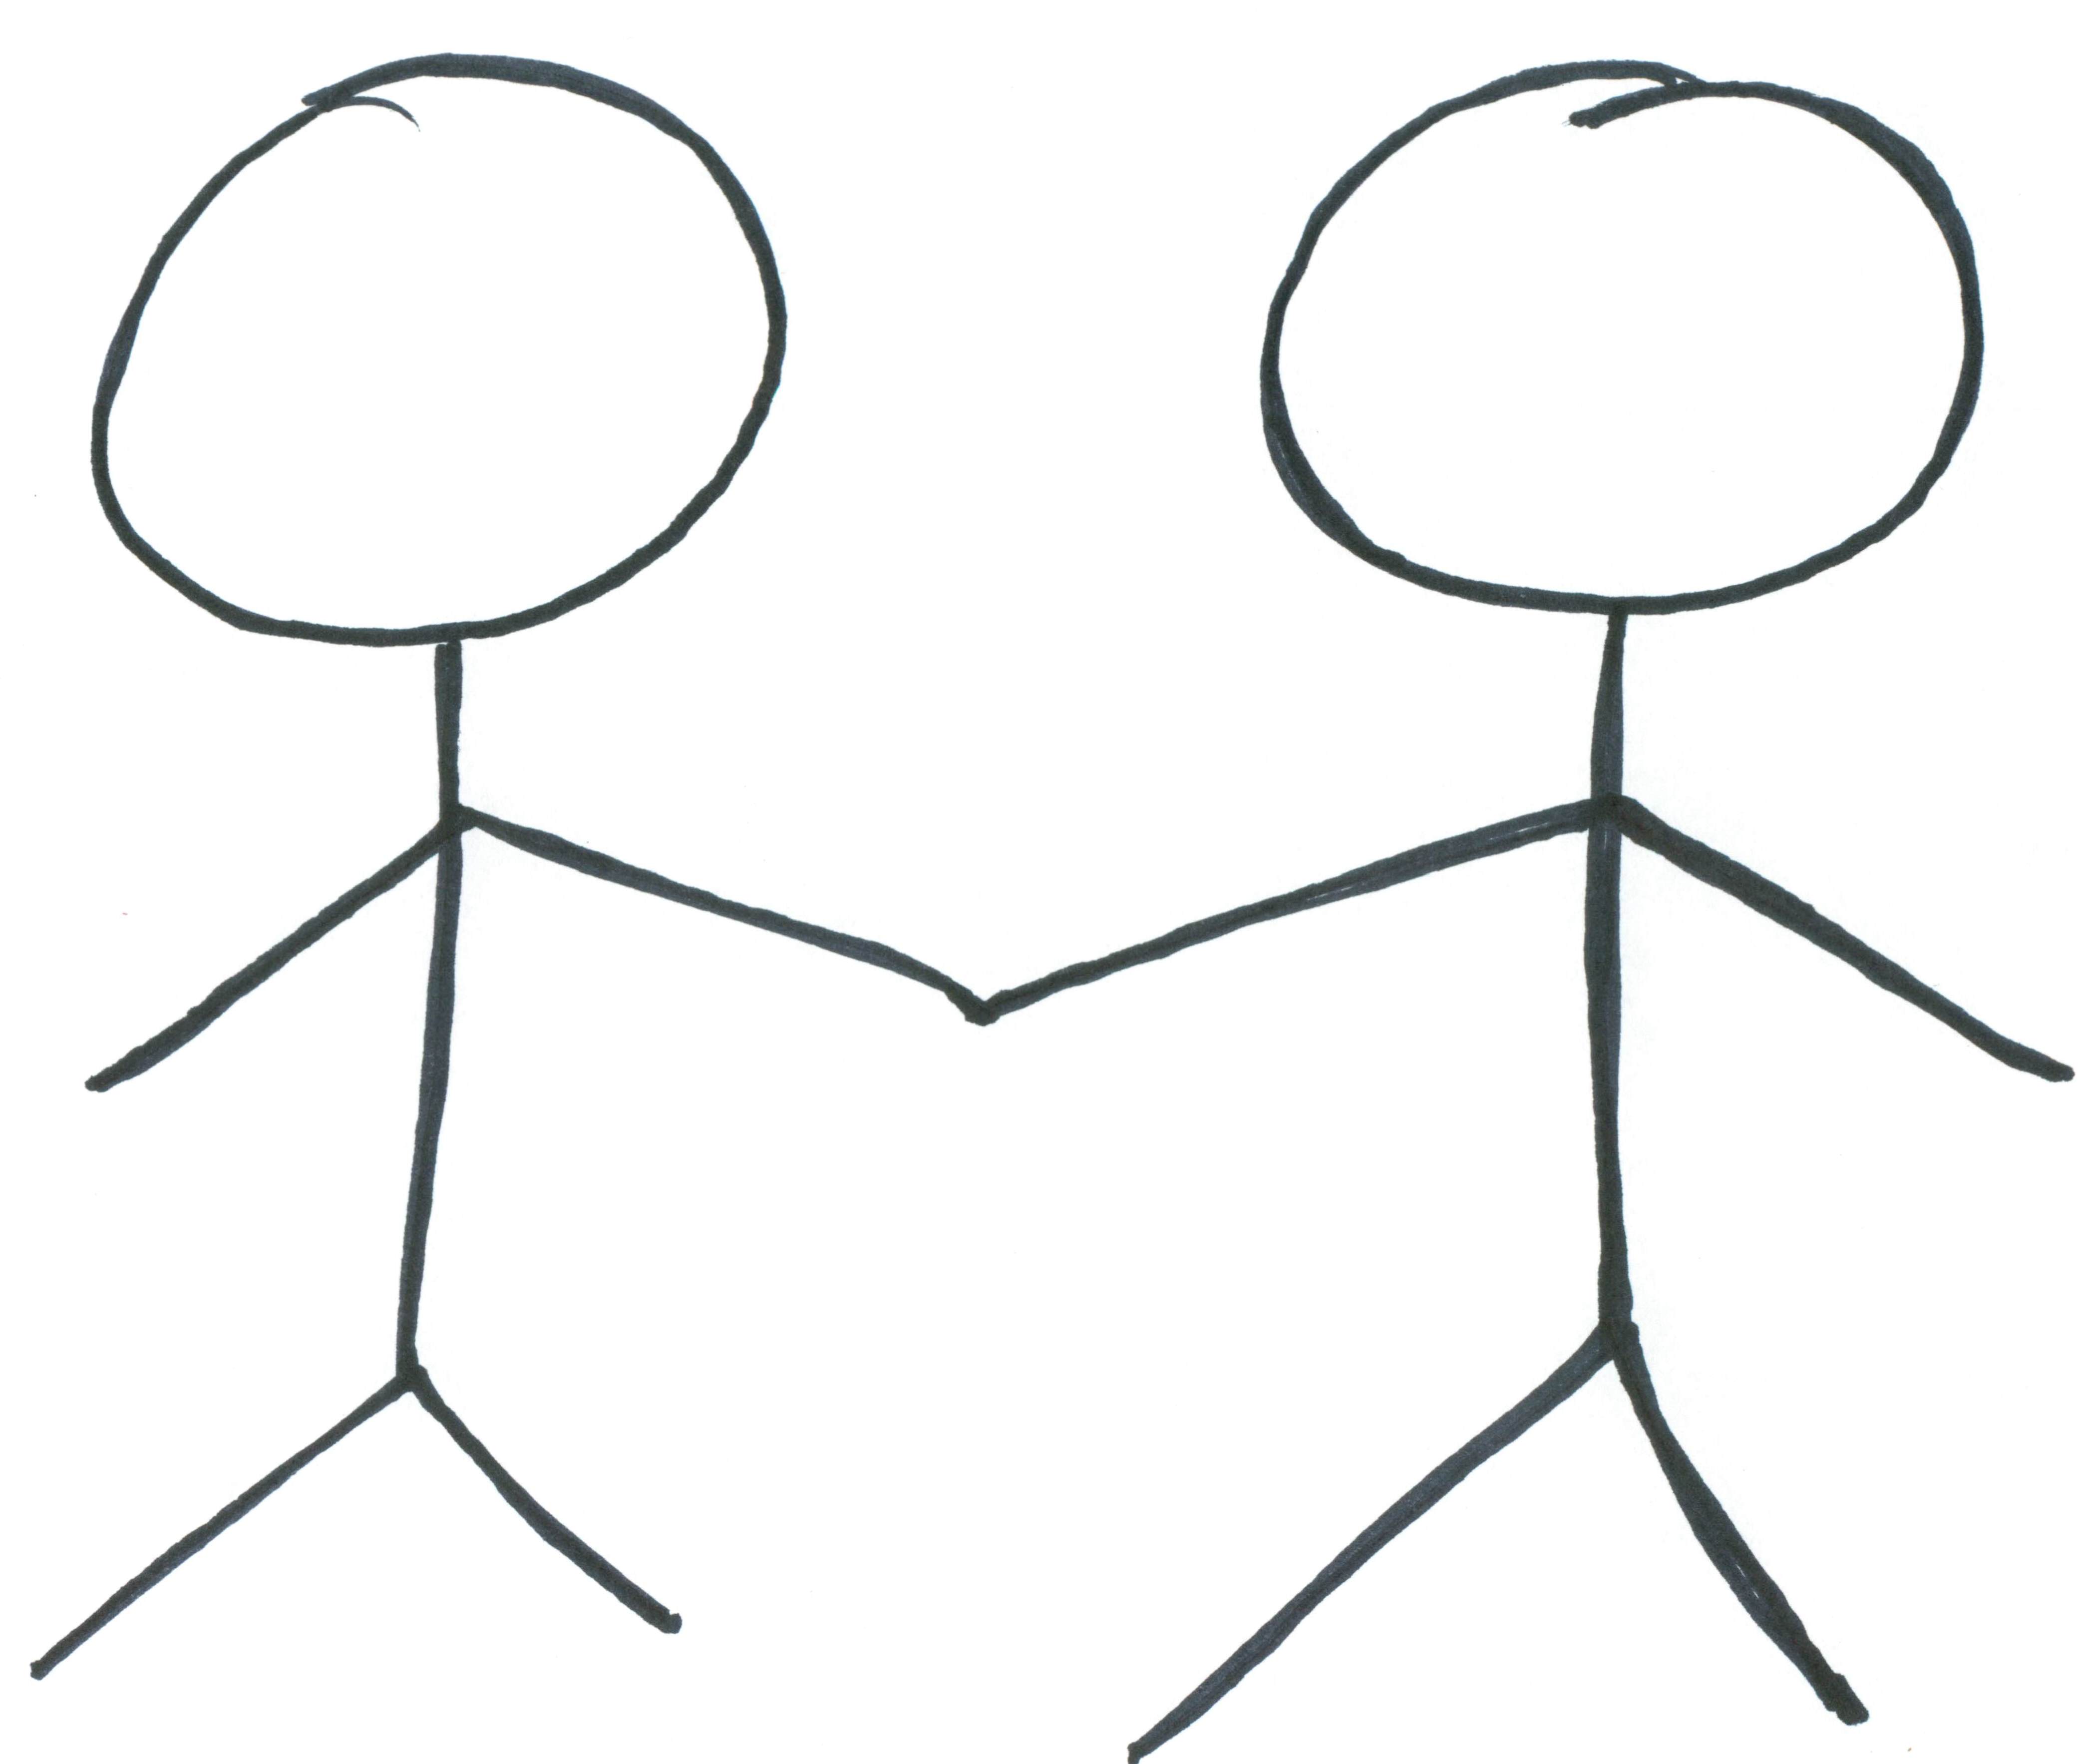 Stick People Holding Hands Clipart | Clipart Panda - Free Clipart ...